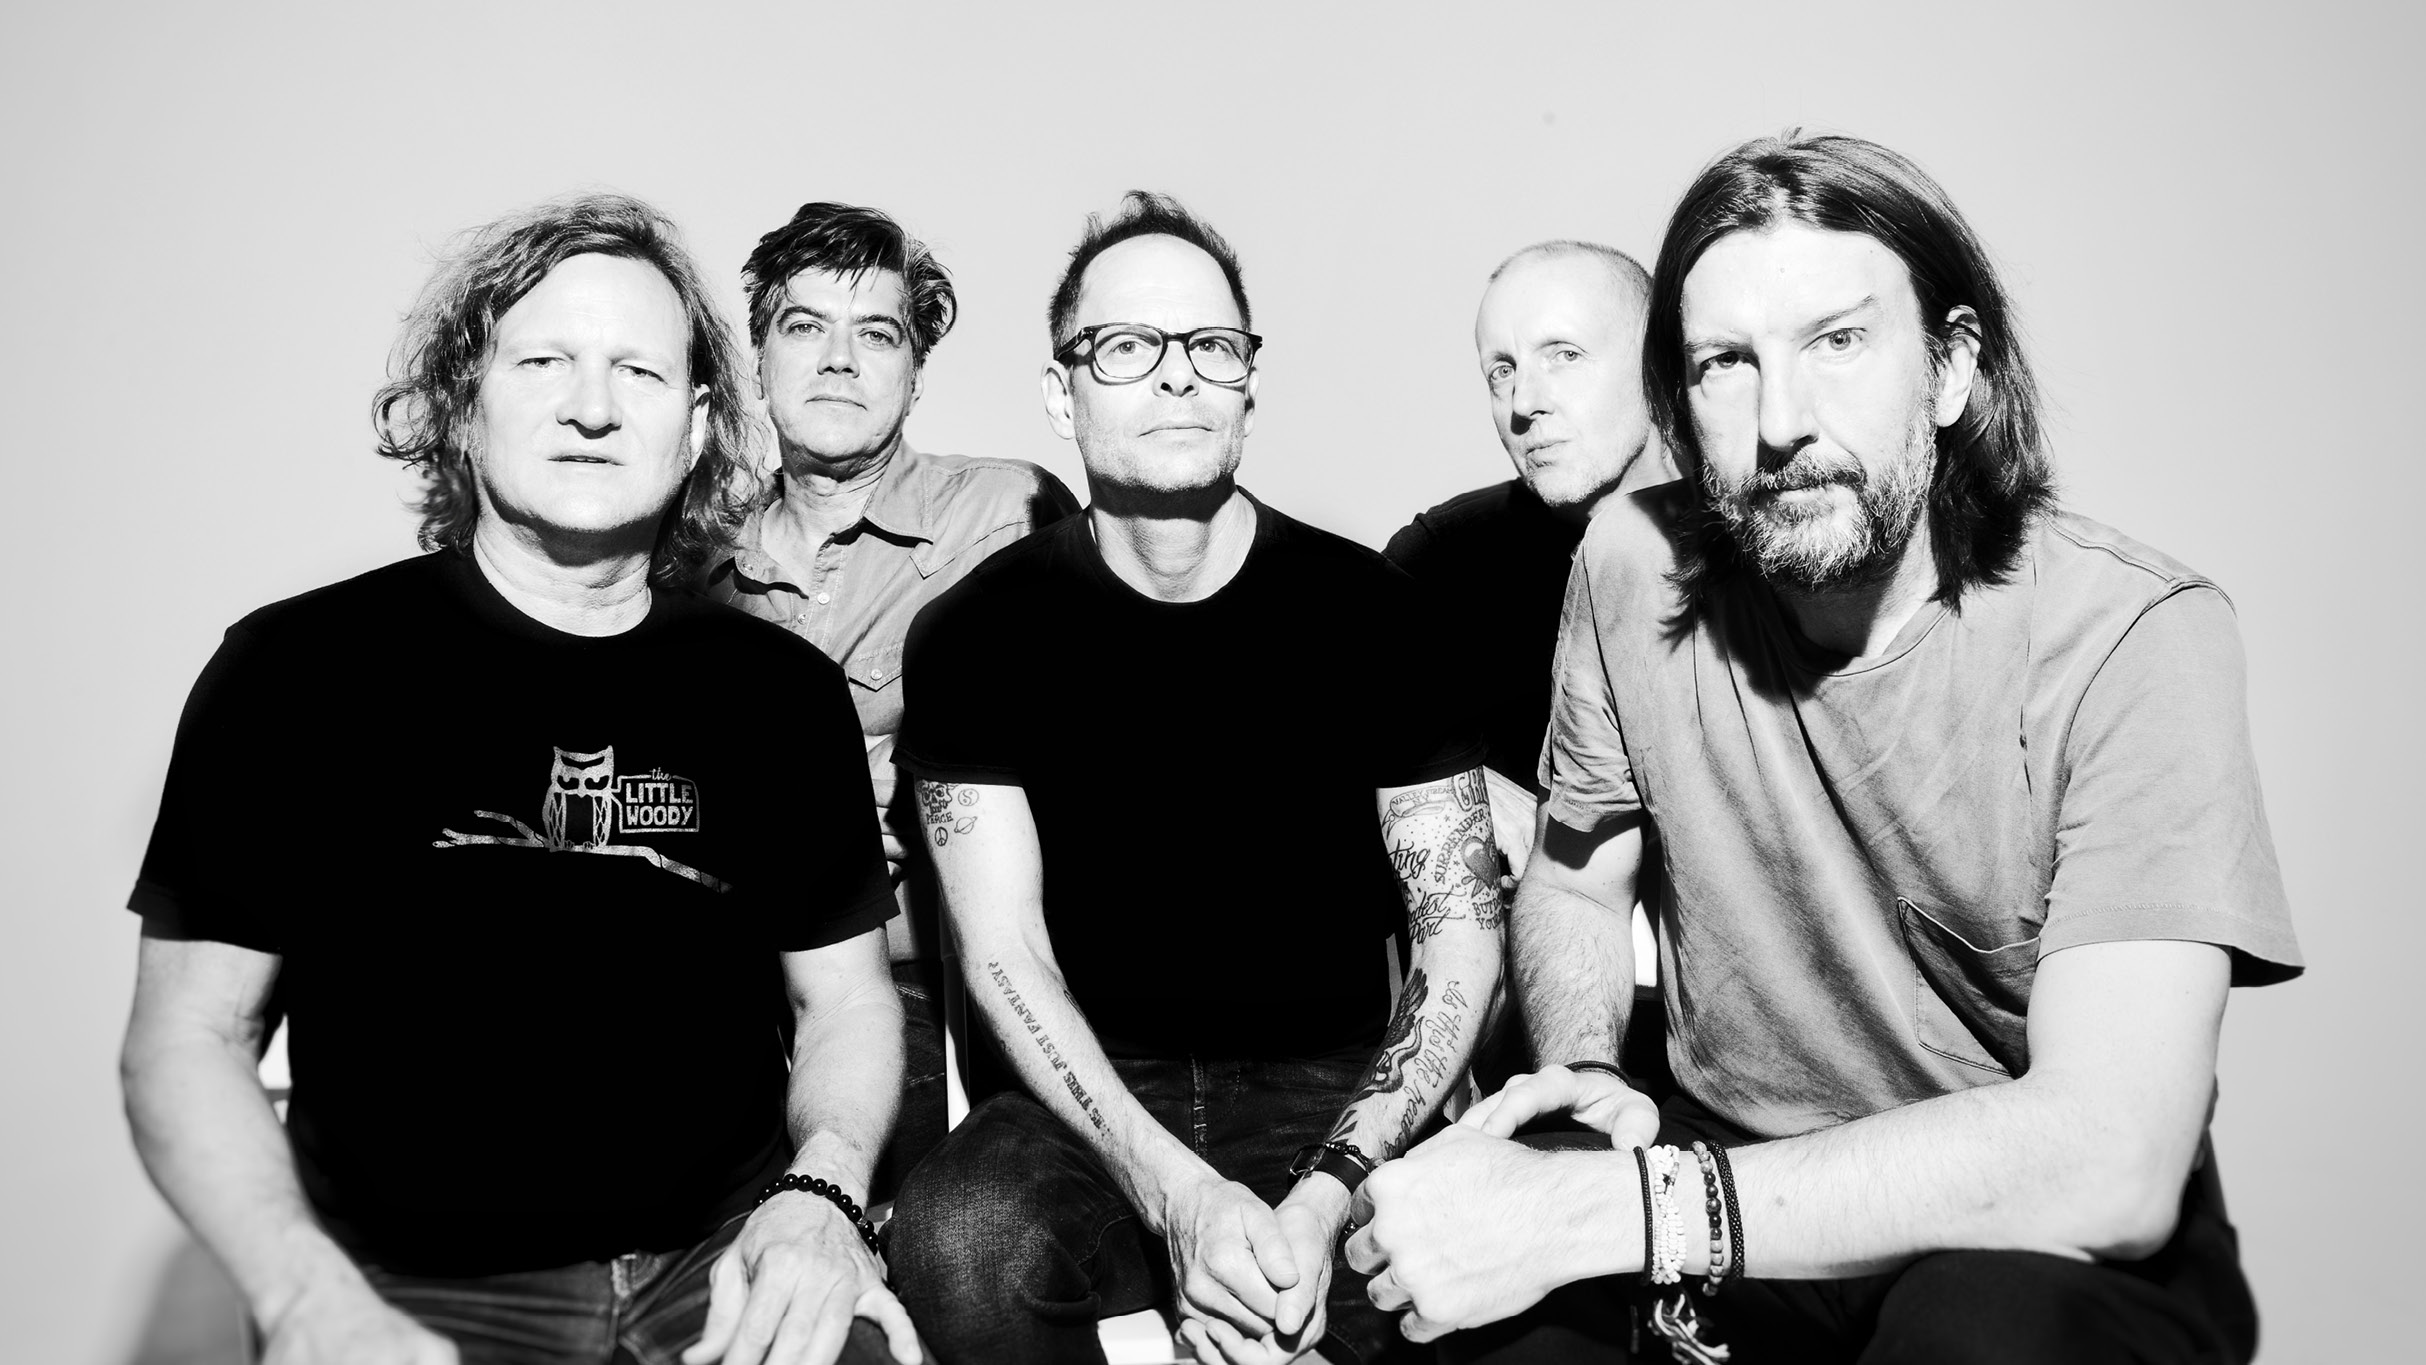 Gin Blossoms + Toad the Wet Sprocket w/ special guest Vertical Horizon